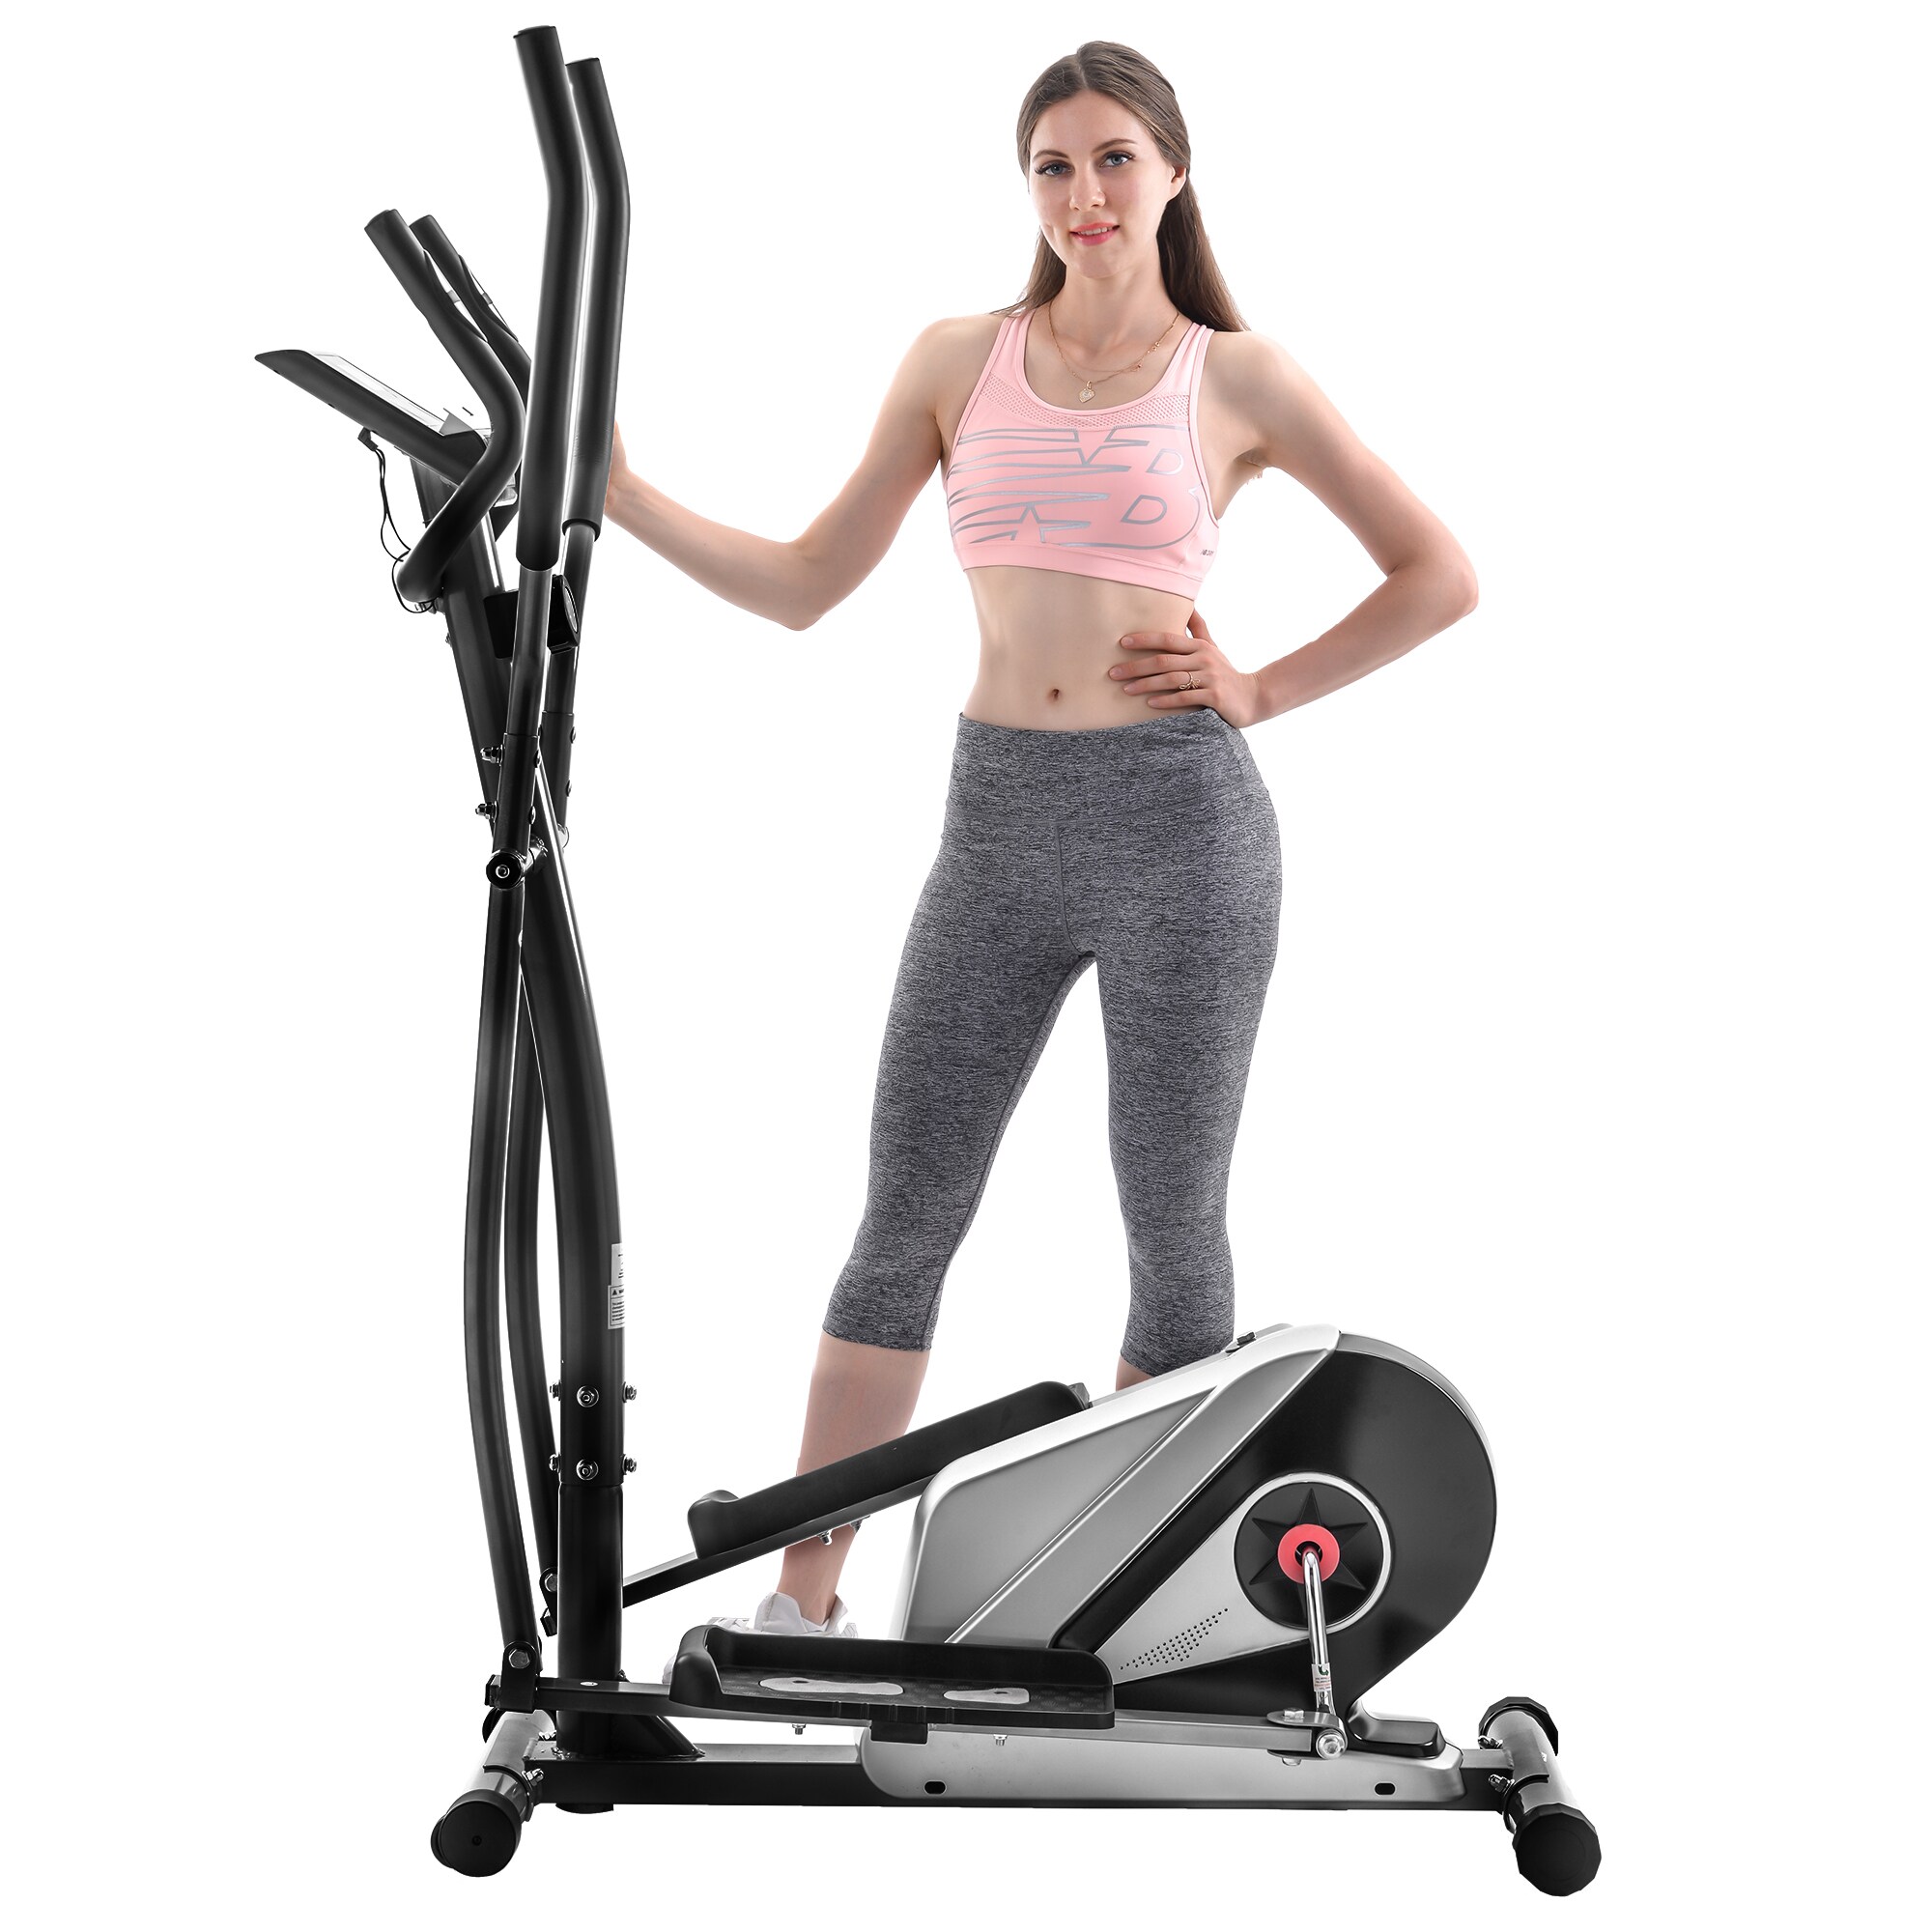 ncient Elliptical Machine Eliptical Trainer Exercise Machine for Home Use Magnetic Smooth Quiet Driven with LCD Monitor and Pulse Rate Grips 